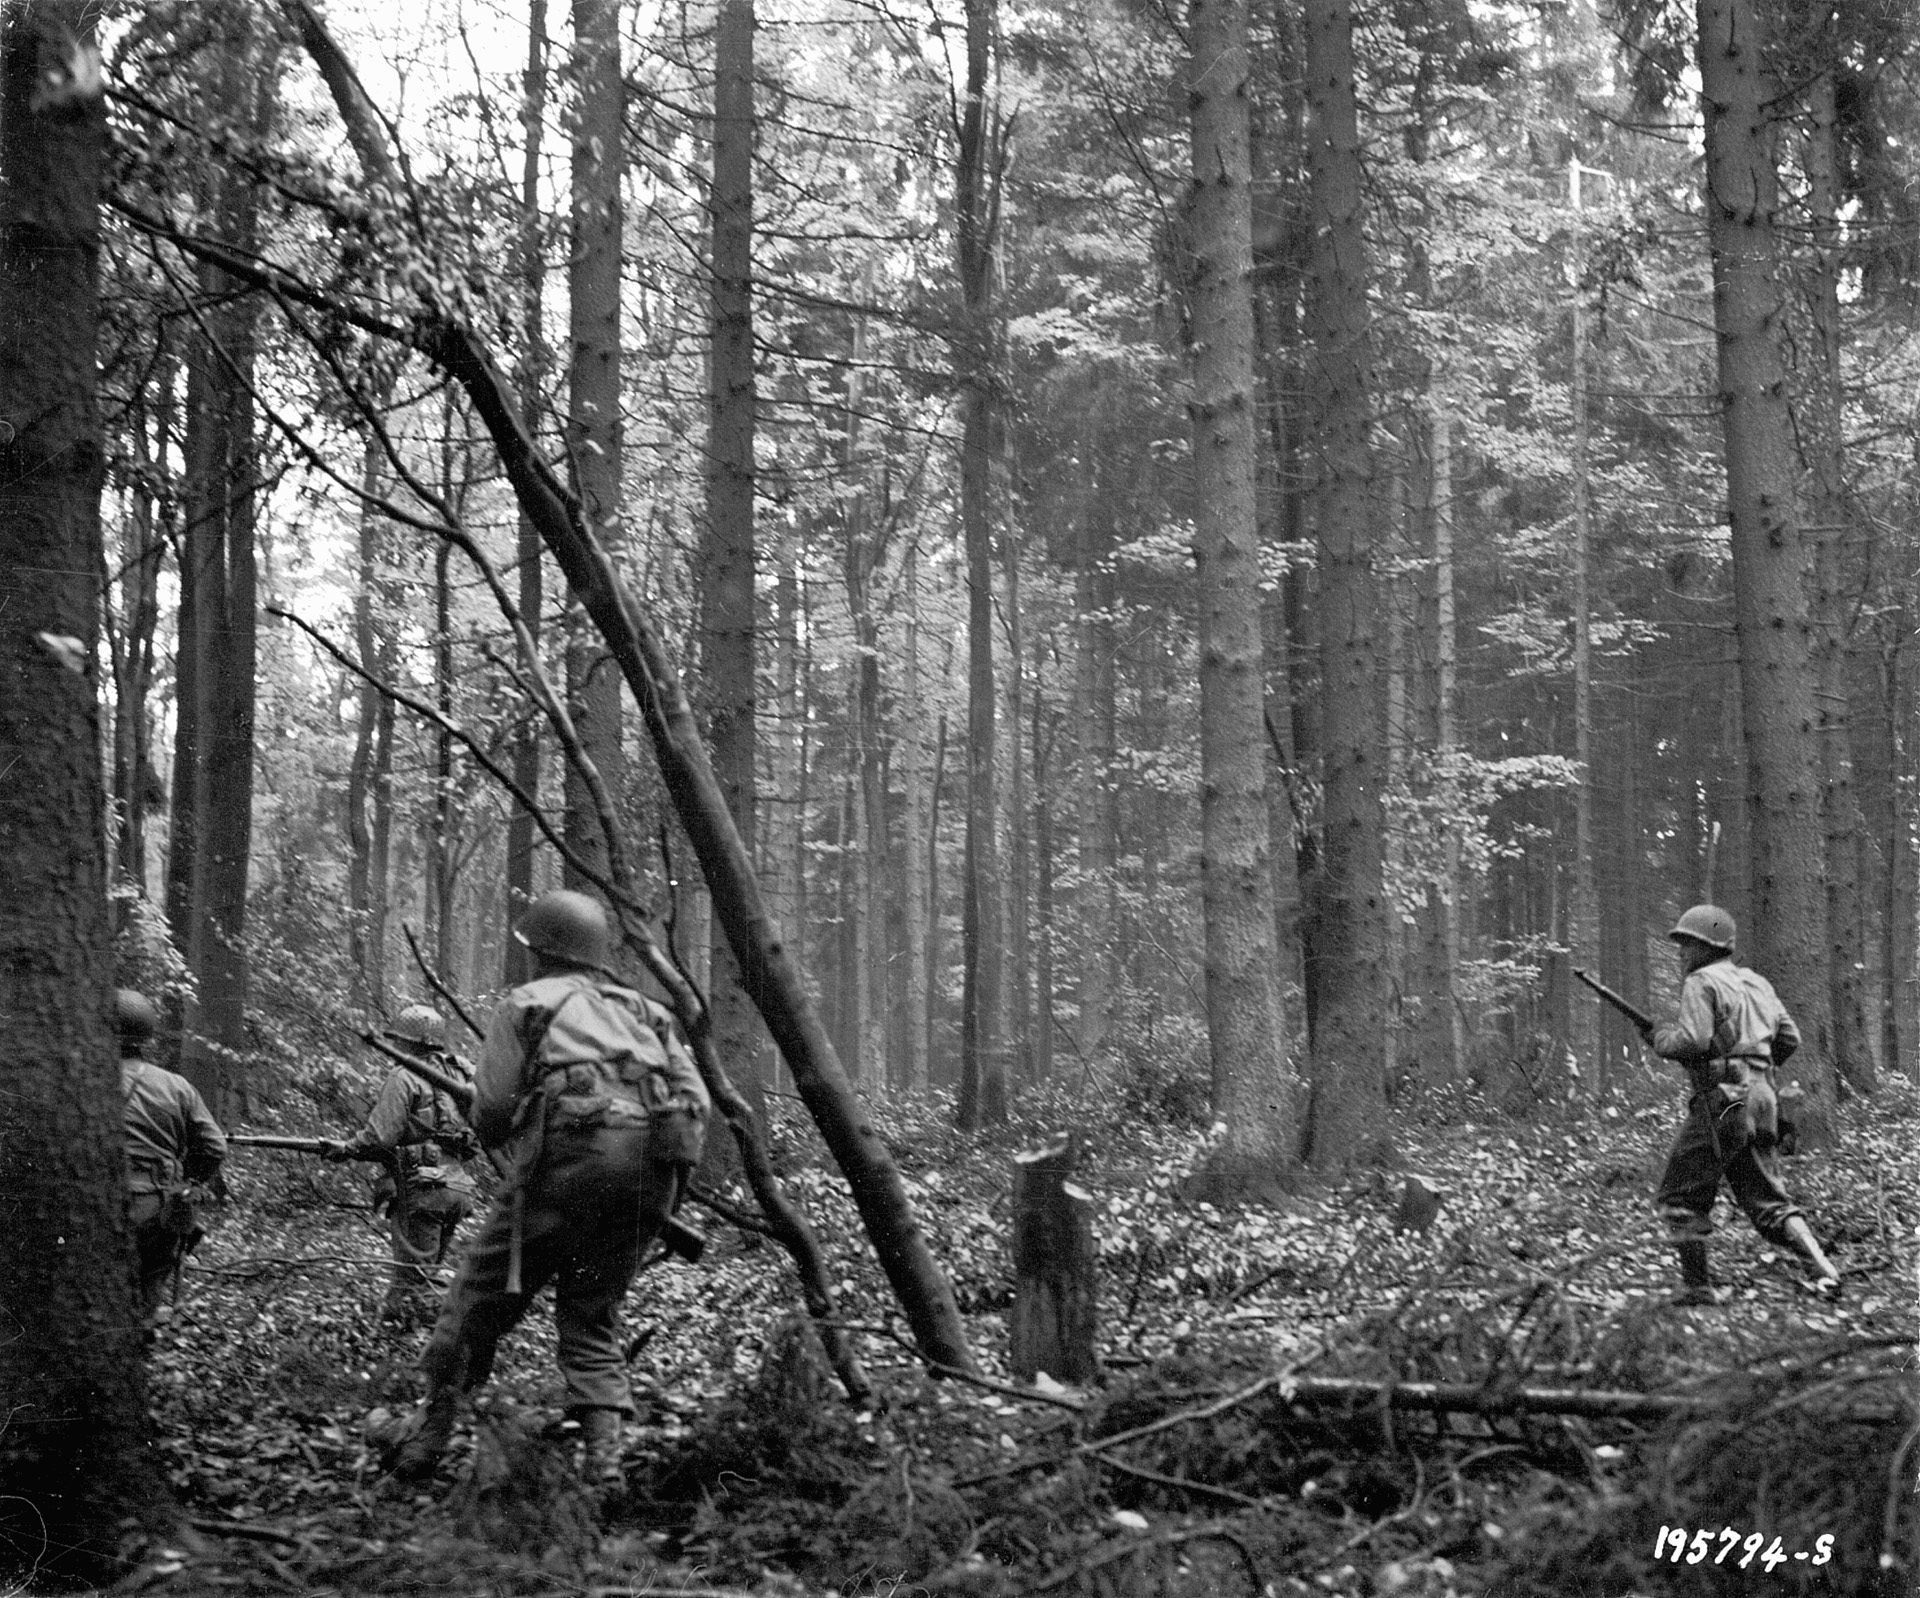 The heavily wooded terrain restricted visibility and mobility. Here a squad of 28th Infantry Division men advances cautiously through the Hürtgen Forest near Vossenack during the attack on Schmidt, November 3.